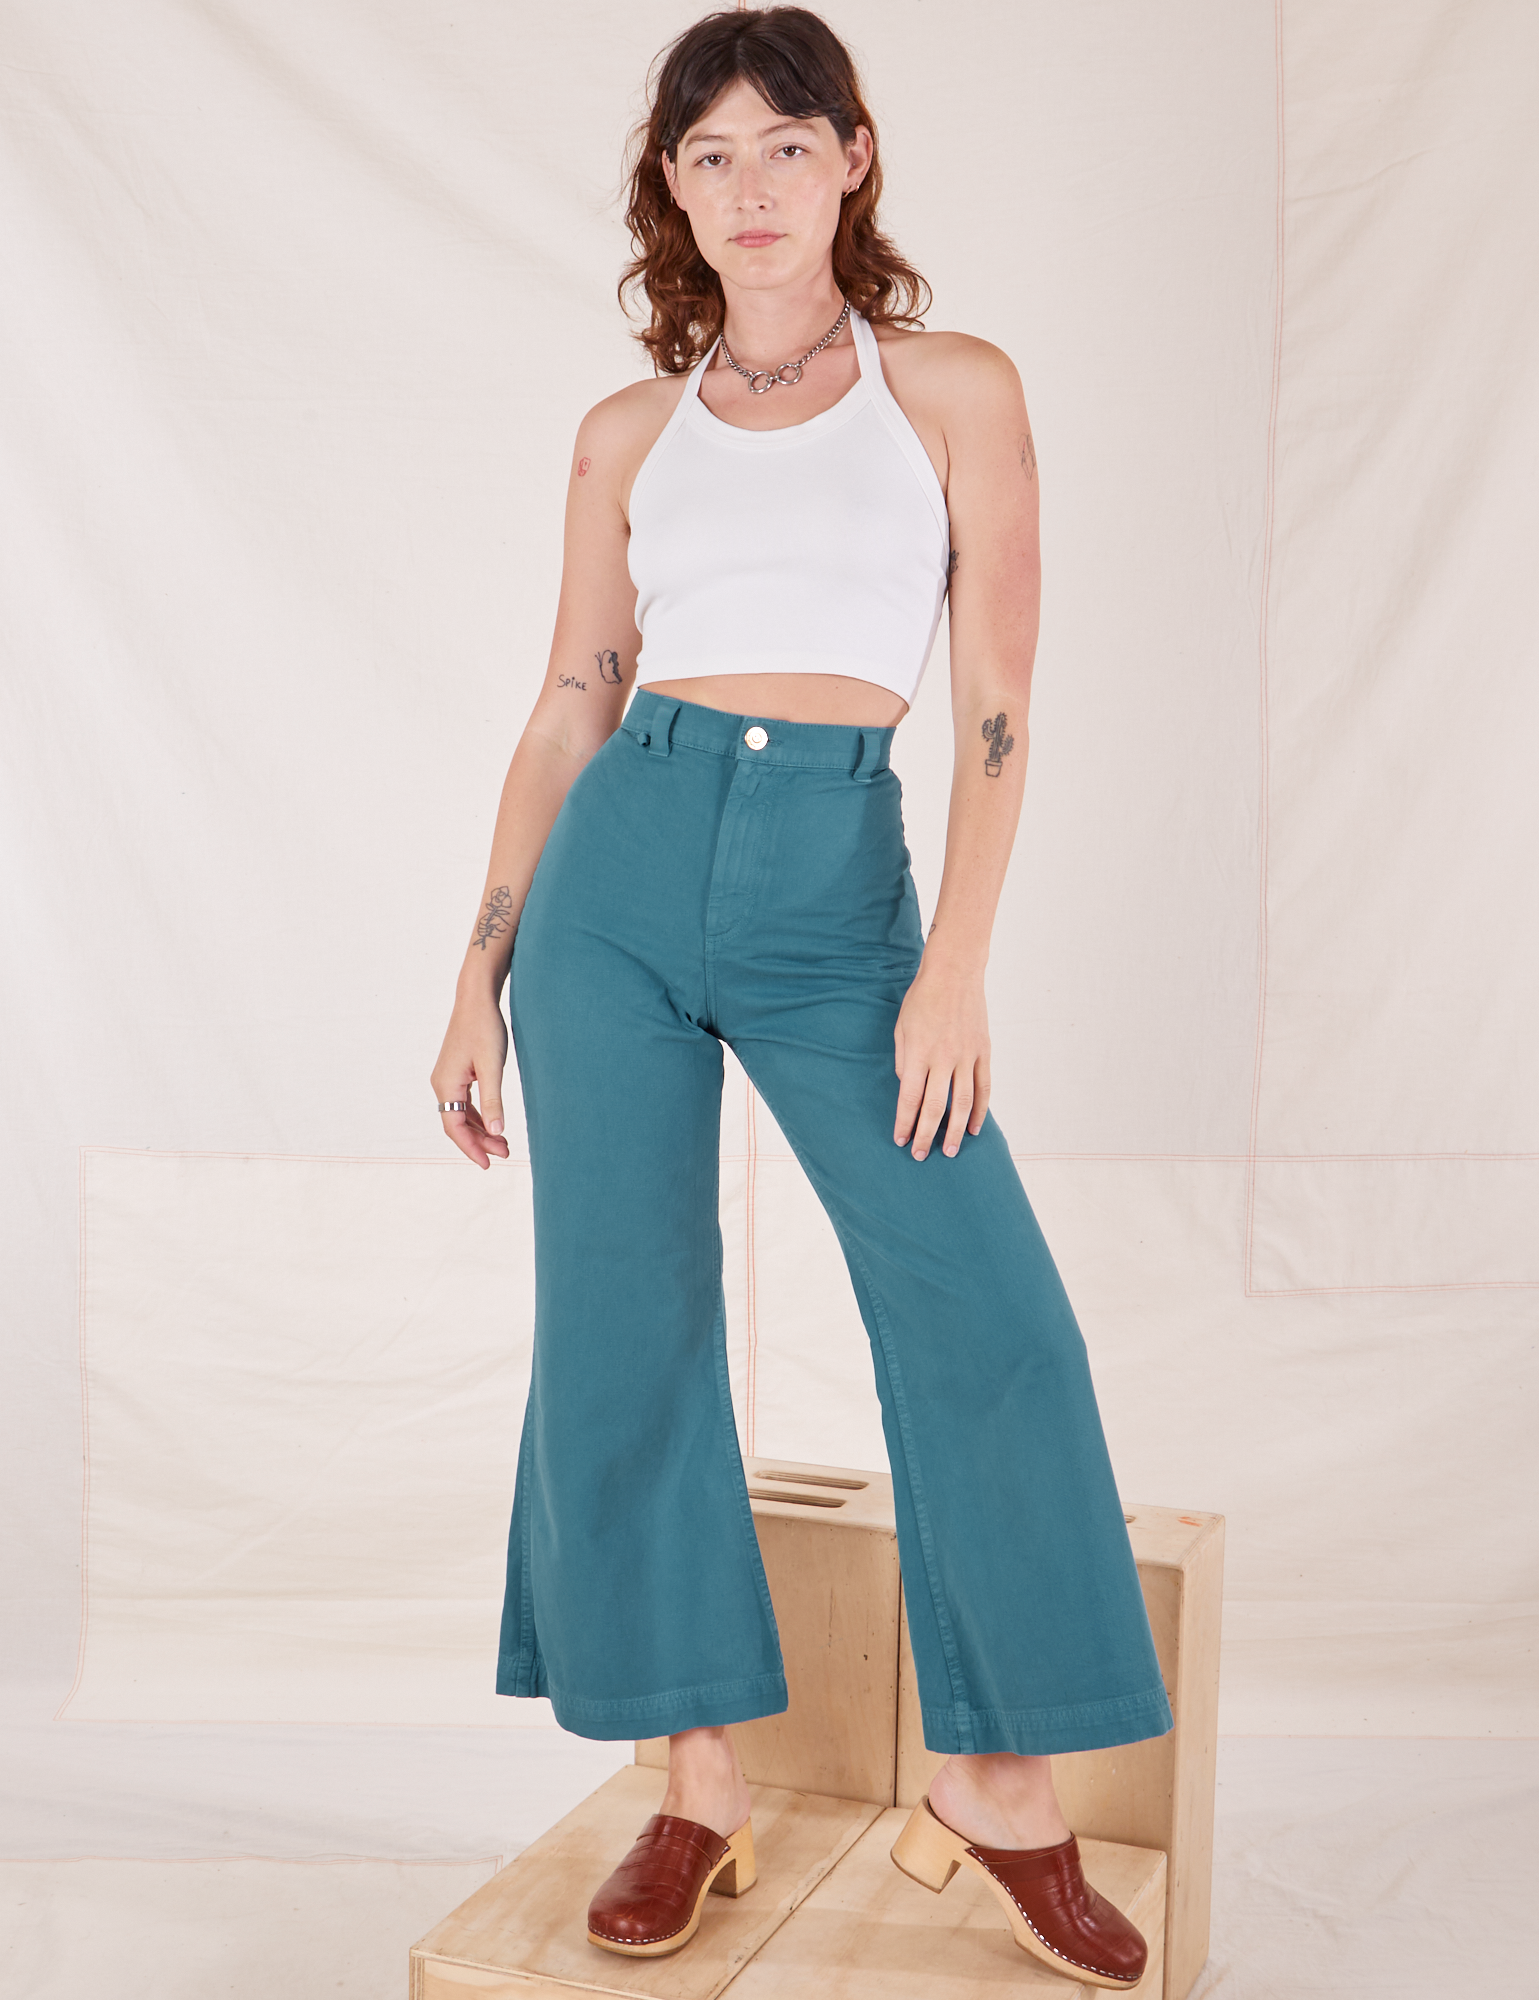 Alex is 5&#39;8&quot; and wearing XXS Bell Bottoms in Marine Blue paired with Halter Top in vintage tee off-white